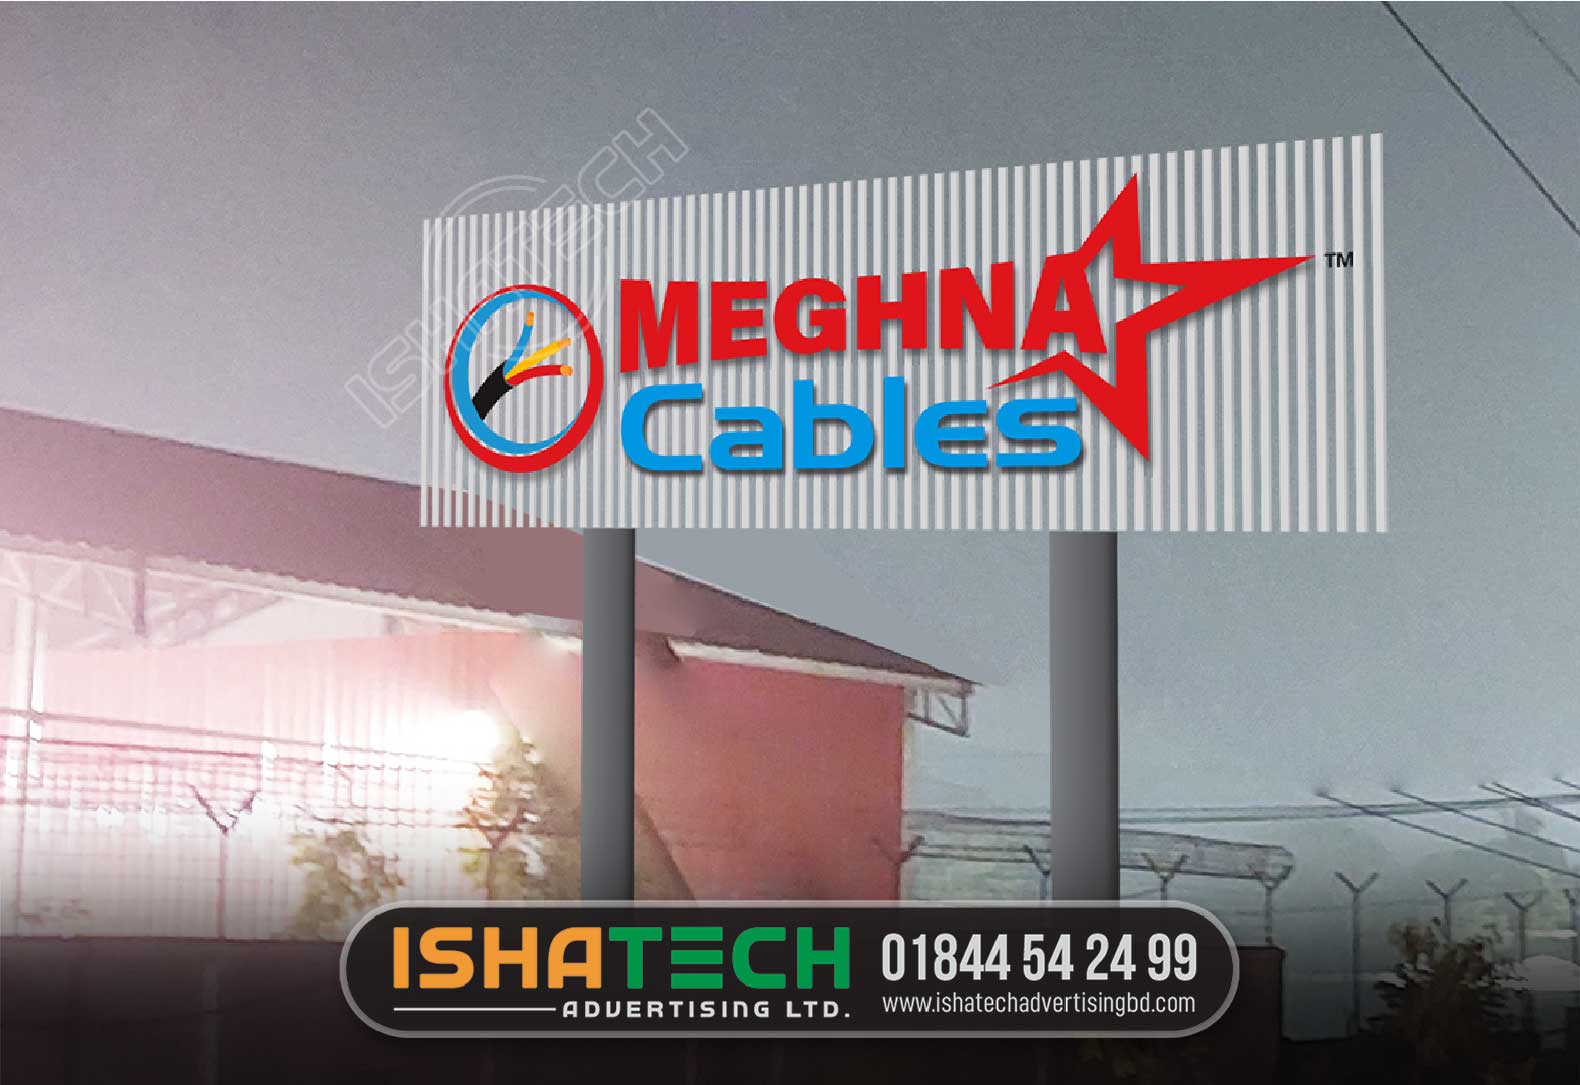 In the bustling business landscape of Bangladesh, standing out is crucial for success. If you're seeking top-quality signboards to enhance your business presence, look no further than Ishatech Advertising Ltd. We are the foremost Signboard shop in Bangladesh, renowned for our expertise in creating Signboarder Dokan, Showroom, Karkhana Letter Profile, and Led Lighting Signage solutions in Dhaka and beyond. Ishatech Advertising Ltd: Setting the Standard Unparalleled Signboard Expertise At Ishatech Advertising Ltd, we take immense pride in our unparalleled expertise in signboard craftsmanship. Our dedicated team of skilled artisans combines creativity with cutting-edge technology to bring your vision to life. Whether you require a captivating LED-lit sign or a classic Karkhana Letter Profile sign, we possess the knowledge and experience to deliver exceptional results. Tailored Signage Solutions We understand that each business is unique, and your signage should reflect that distinctiveness. Ishatech Advertising Ltd offers customized signboard solutions meticulously tailored to your specific requirements. Our talented designers work closely with you to create signboards that not only meet but surpass your expectations. Excellence in Led Lighting Signage Illuminate your brand with our Led Lighting Signage solutions. We utilize high-quality LED lights that not only enhance the visibility of your signboard but also conserve energy, making them an environmentally conscious choice. From captivating neon signs to sleek and modern LED displays, Ishatech Advertising Ltd offers a comprehensive range. Serving Dhaka and Beyond Whether your business is nestled in the heart of Dhaka or situated anywhere else in Bangladesh, Ishatech Advertising Ltd is at your service. We guarantee prompt delivery and professional installation of your signboards, ensuring your brand shines no matter where you are. Why Choose Ishatech Advertising Ltd? Commitment to Quality: At Ishatech Advertising Ltd, our dedication to quality is unwavering. We employ the finest materials and rigorous quality control measures to ensure that every signboard we create is built to endure. Competitive Pricing: We believe that exceptional signage should be accessible to businesses of all sizes. Ishatech Advertising Ltd offers competitive pricing without compromising on quality. Professional Team: Our team of experts is passionate about their craft. They are committed to realizing your vision and surpassing your expectations. Customer Satisfaction: We gauge our success by your satisfaction. We go above and beyond to ensure that you are thrilled with your Ishatech Advertising Ltd experience. Contact Us Today Are you ready to elevate your brand's visibility with the premier Signboard shop in Bangladesh? Reach out to Ishatech Advertising Ltd today. We are eager to discuss your signage needs, offer expert guidance, and provide a customized quote that aligns with your budget. Don't miss the opportunity to make a lasting impression with Ishatech Advertising Ltd, your trusted Signboard Manufacturer and Company in Bangladesh. Contact us for a consultation and allow us to transform your signage into a potent branding tool.